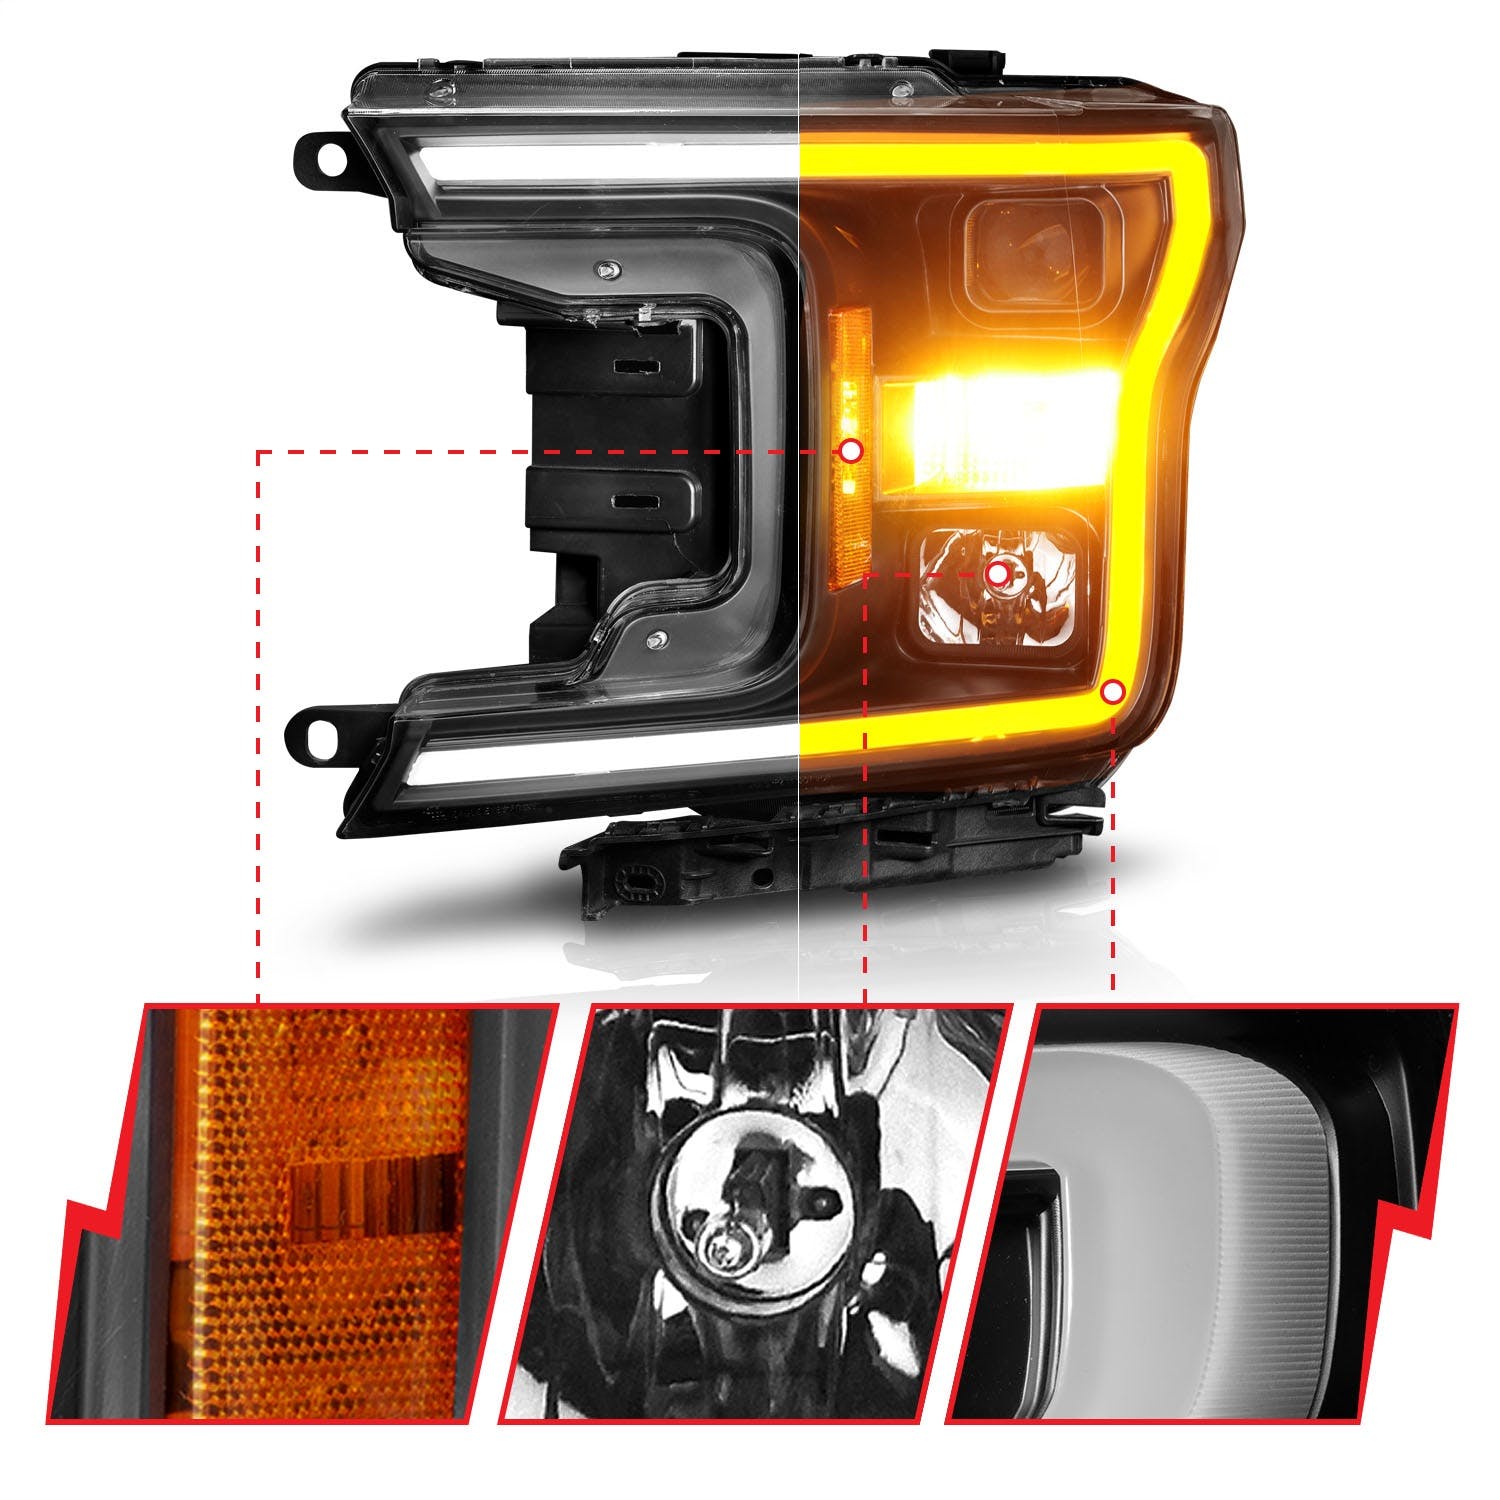 AnzoUSA 111509 Projector Headlight with Plank Style Switchback Black Housing